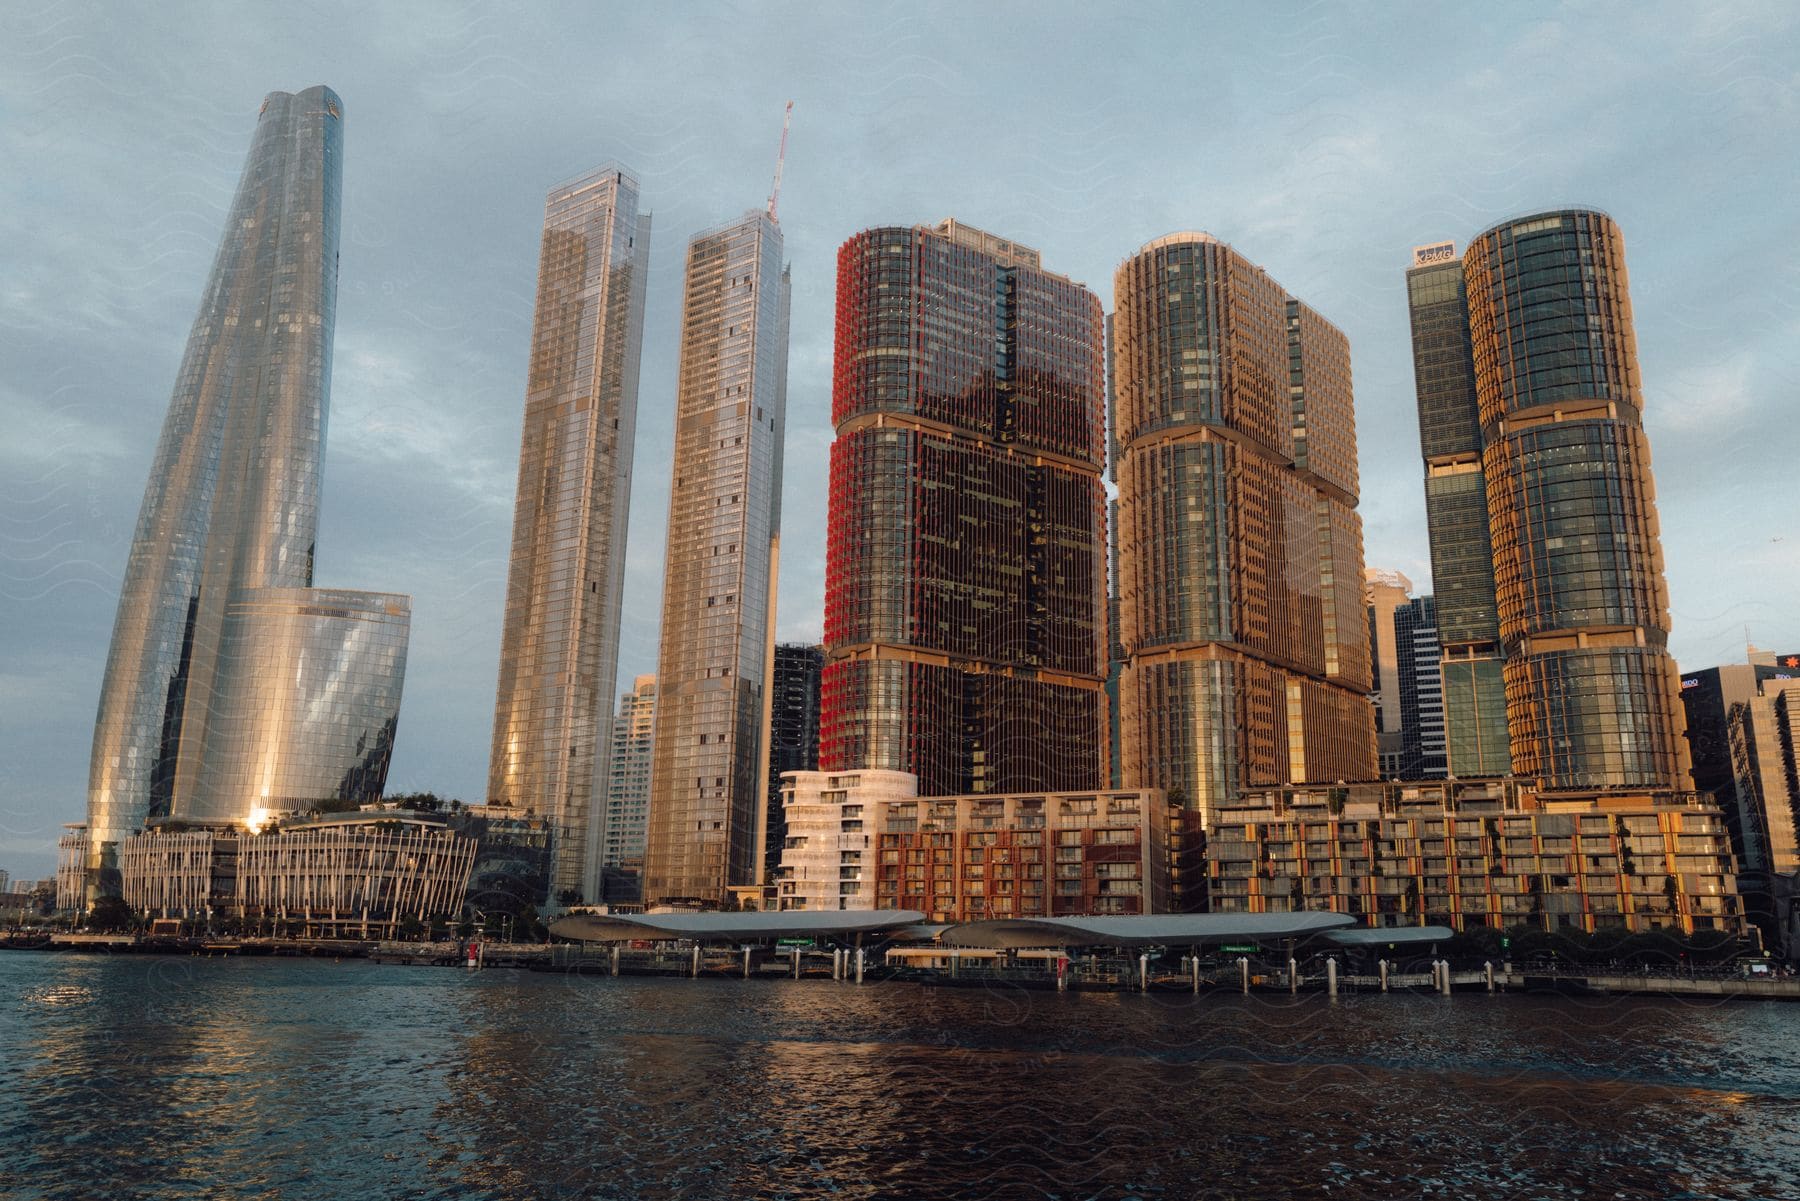 Modern city skyline with tall glass skyscrapers reflecting sunlight, seen from a waterfront perspective.